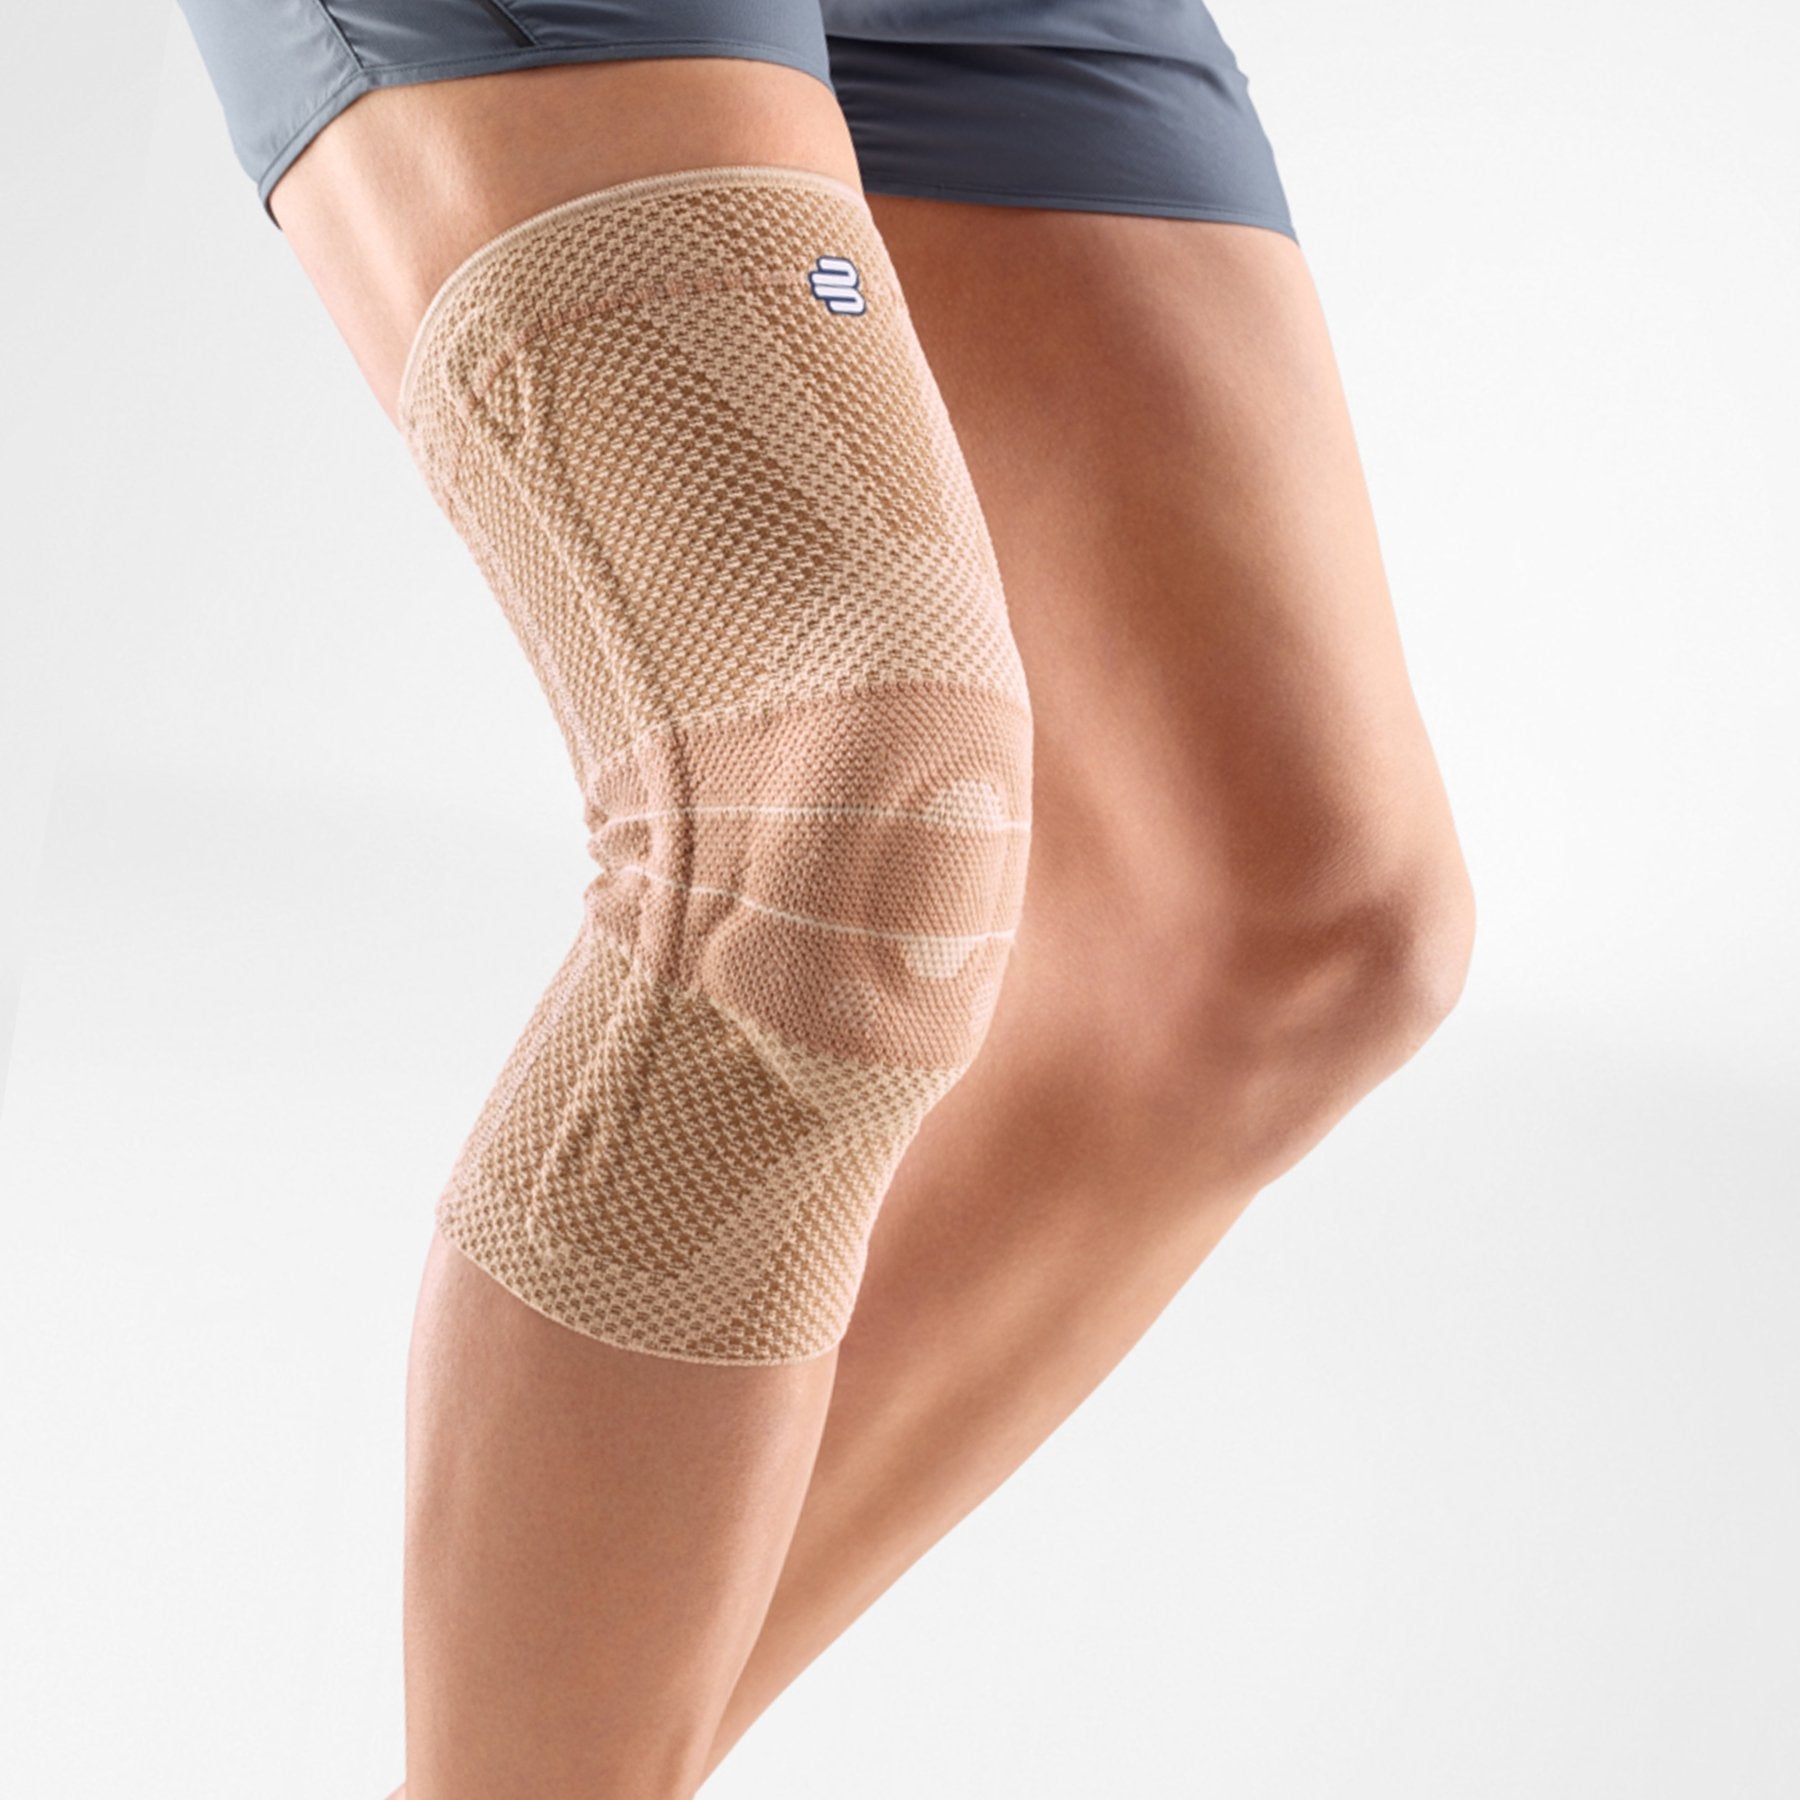 7 Best Knee Braces for Knee Pain Relief, According to Physicians